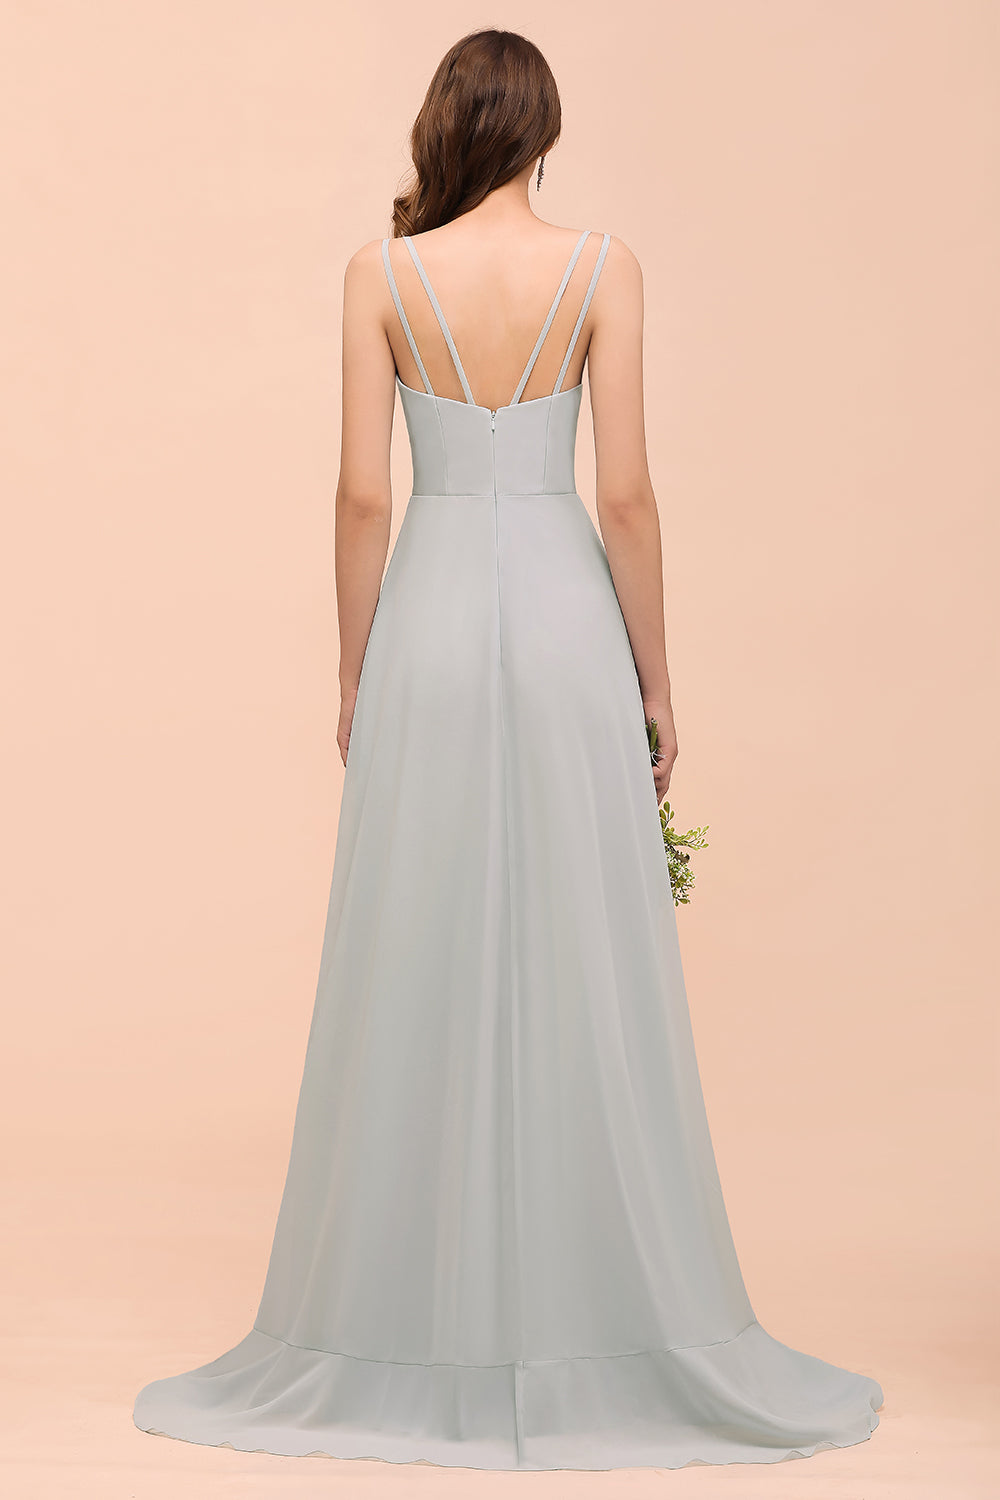 Load image into Gallery viewer, Affordable V-Neck Ruffle Mist Chiffon Bridesmaid Dresses Affordable-27dress
